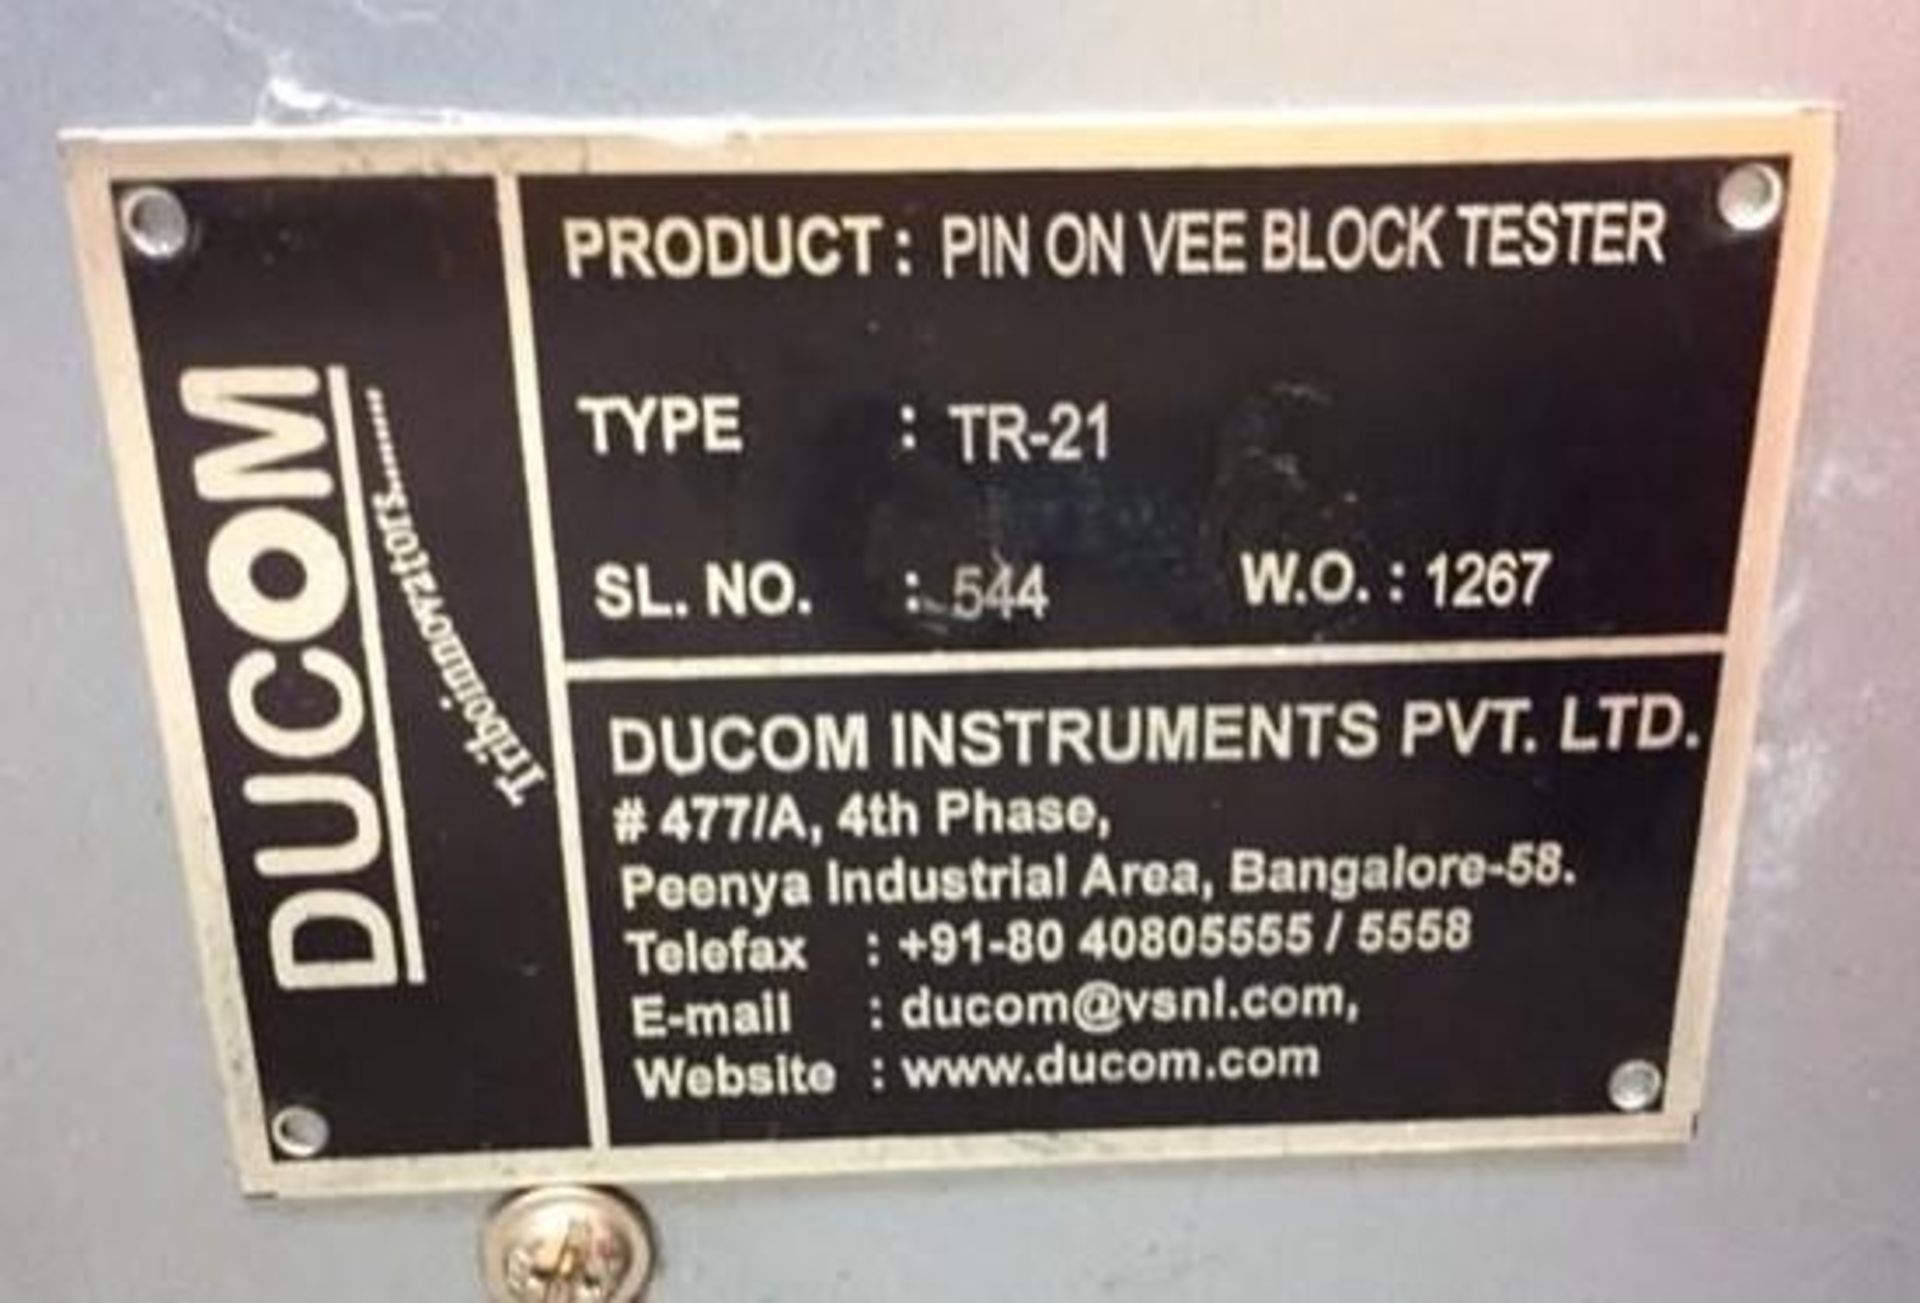 1 x Ducom TR22 Pin and Vee Block Tester - Used to Evaluate Wear Preventive and Load Carrying - Image 4 of 9